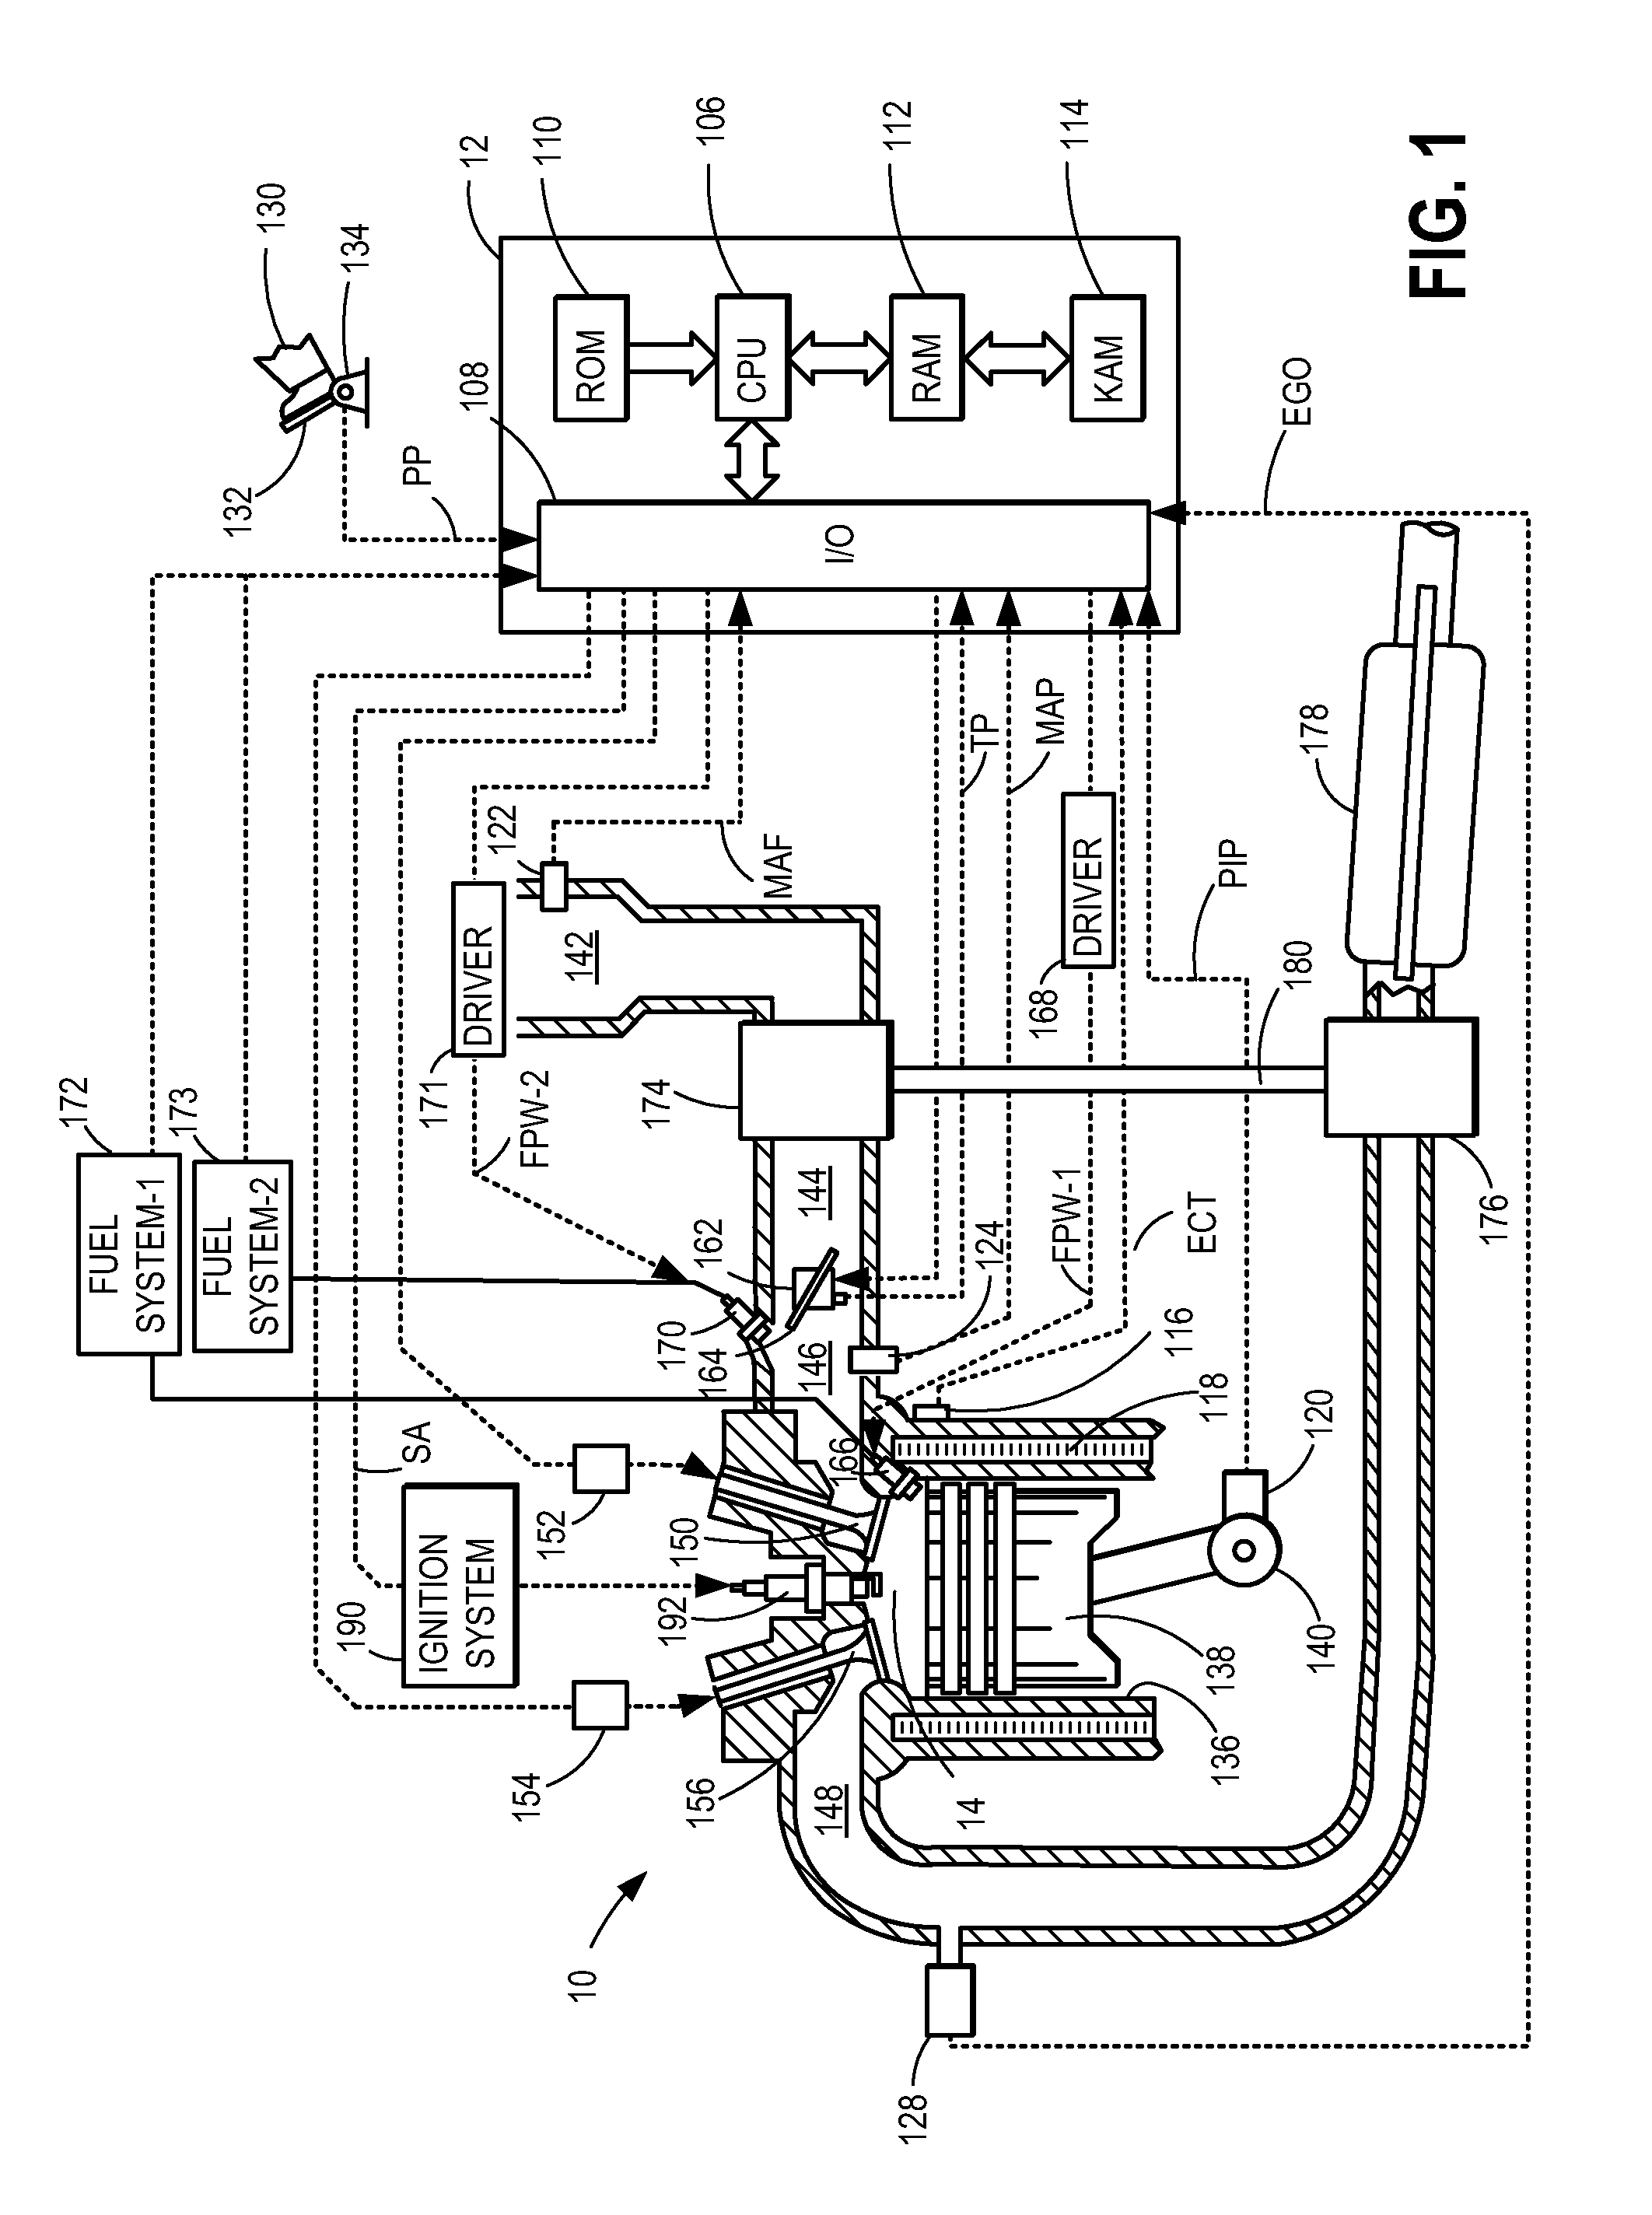 Method and system for dual fuel engine system